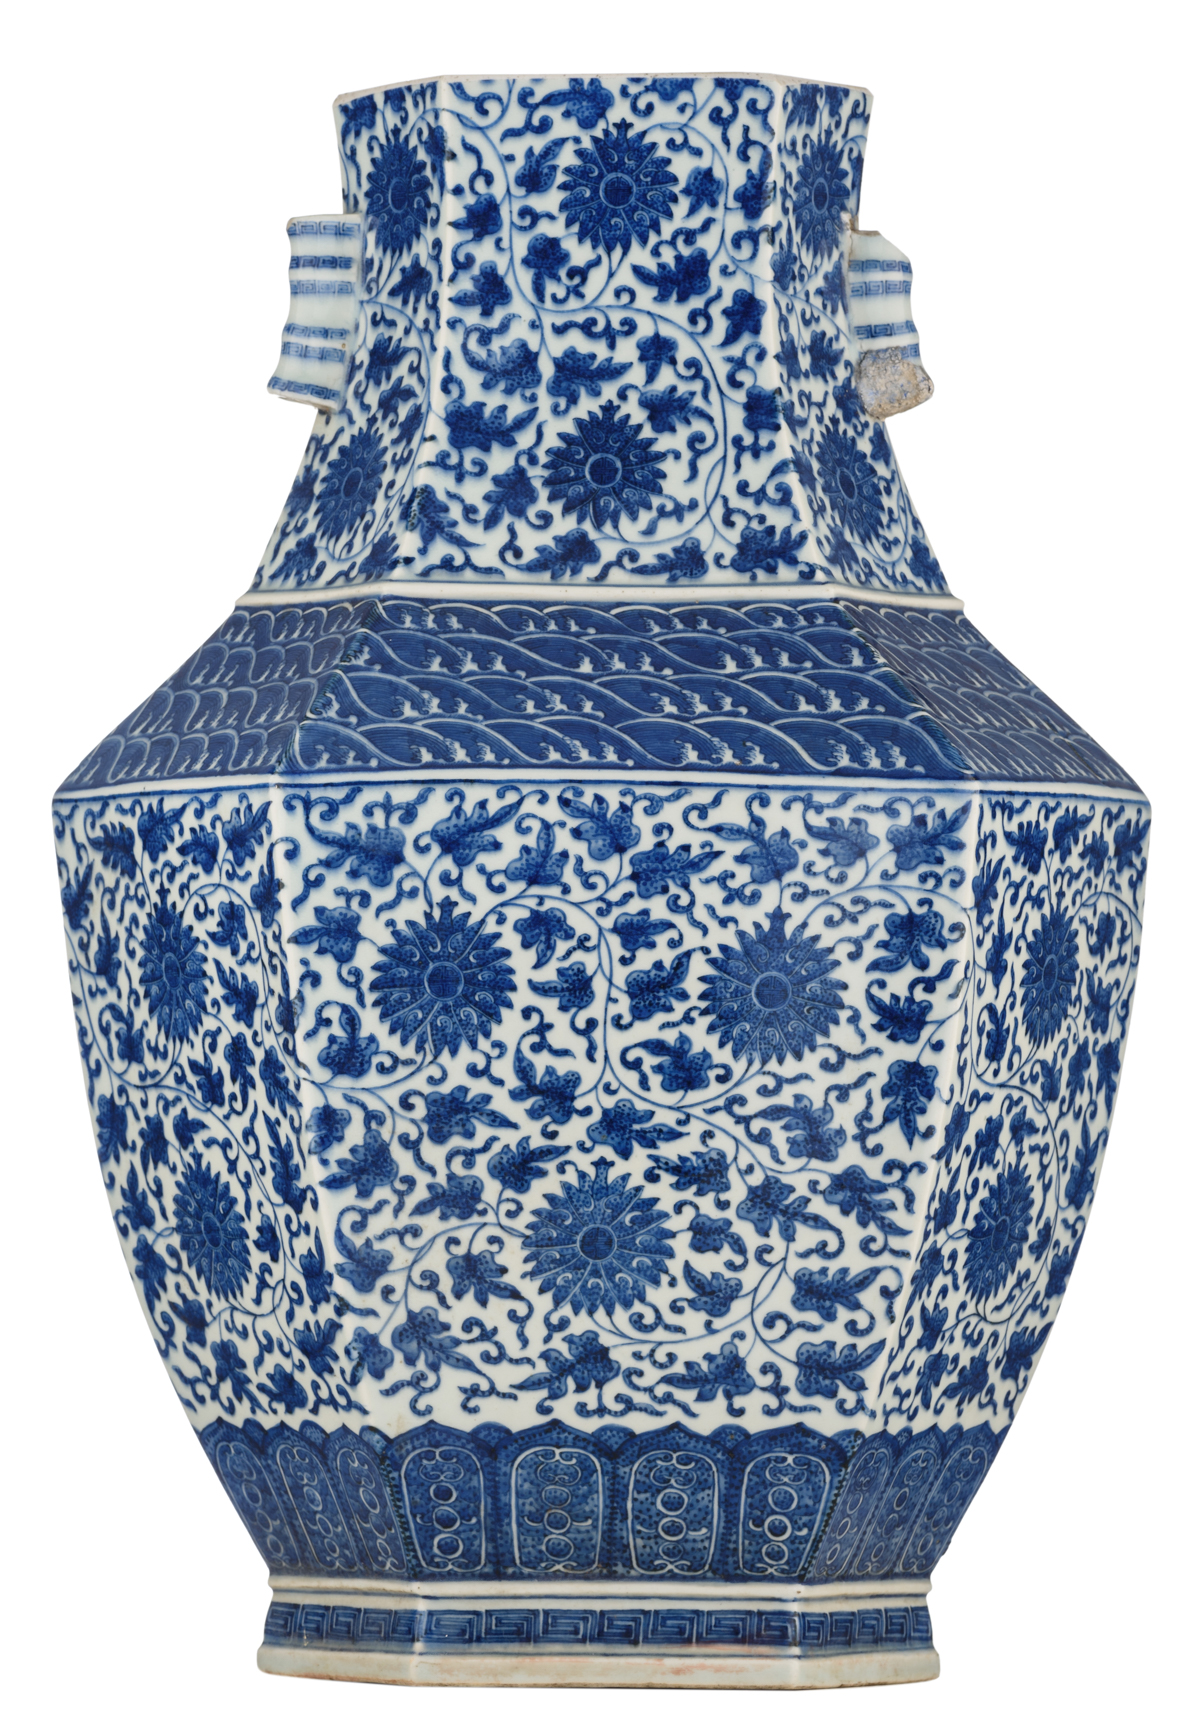 A Chinese hexagonal blue and white hu vase, decorated with floral scrolls and shou signs on the